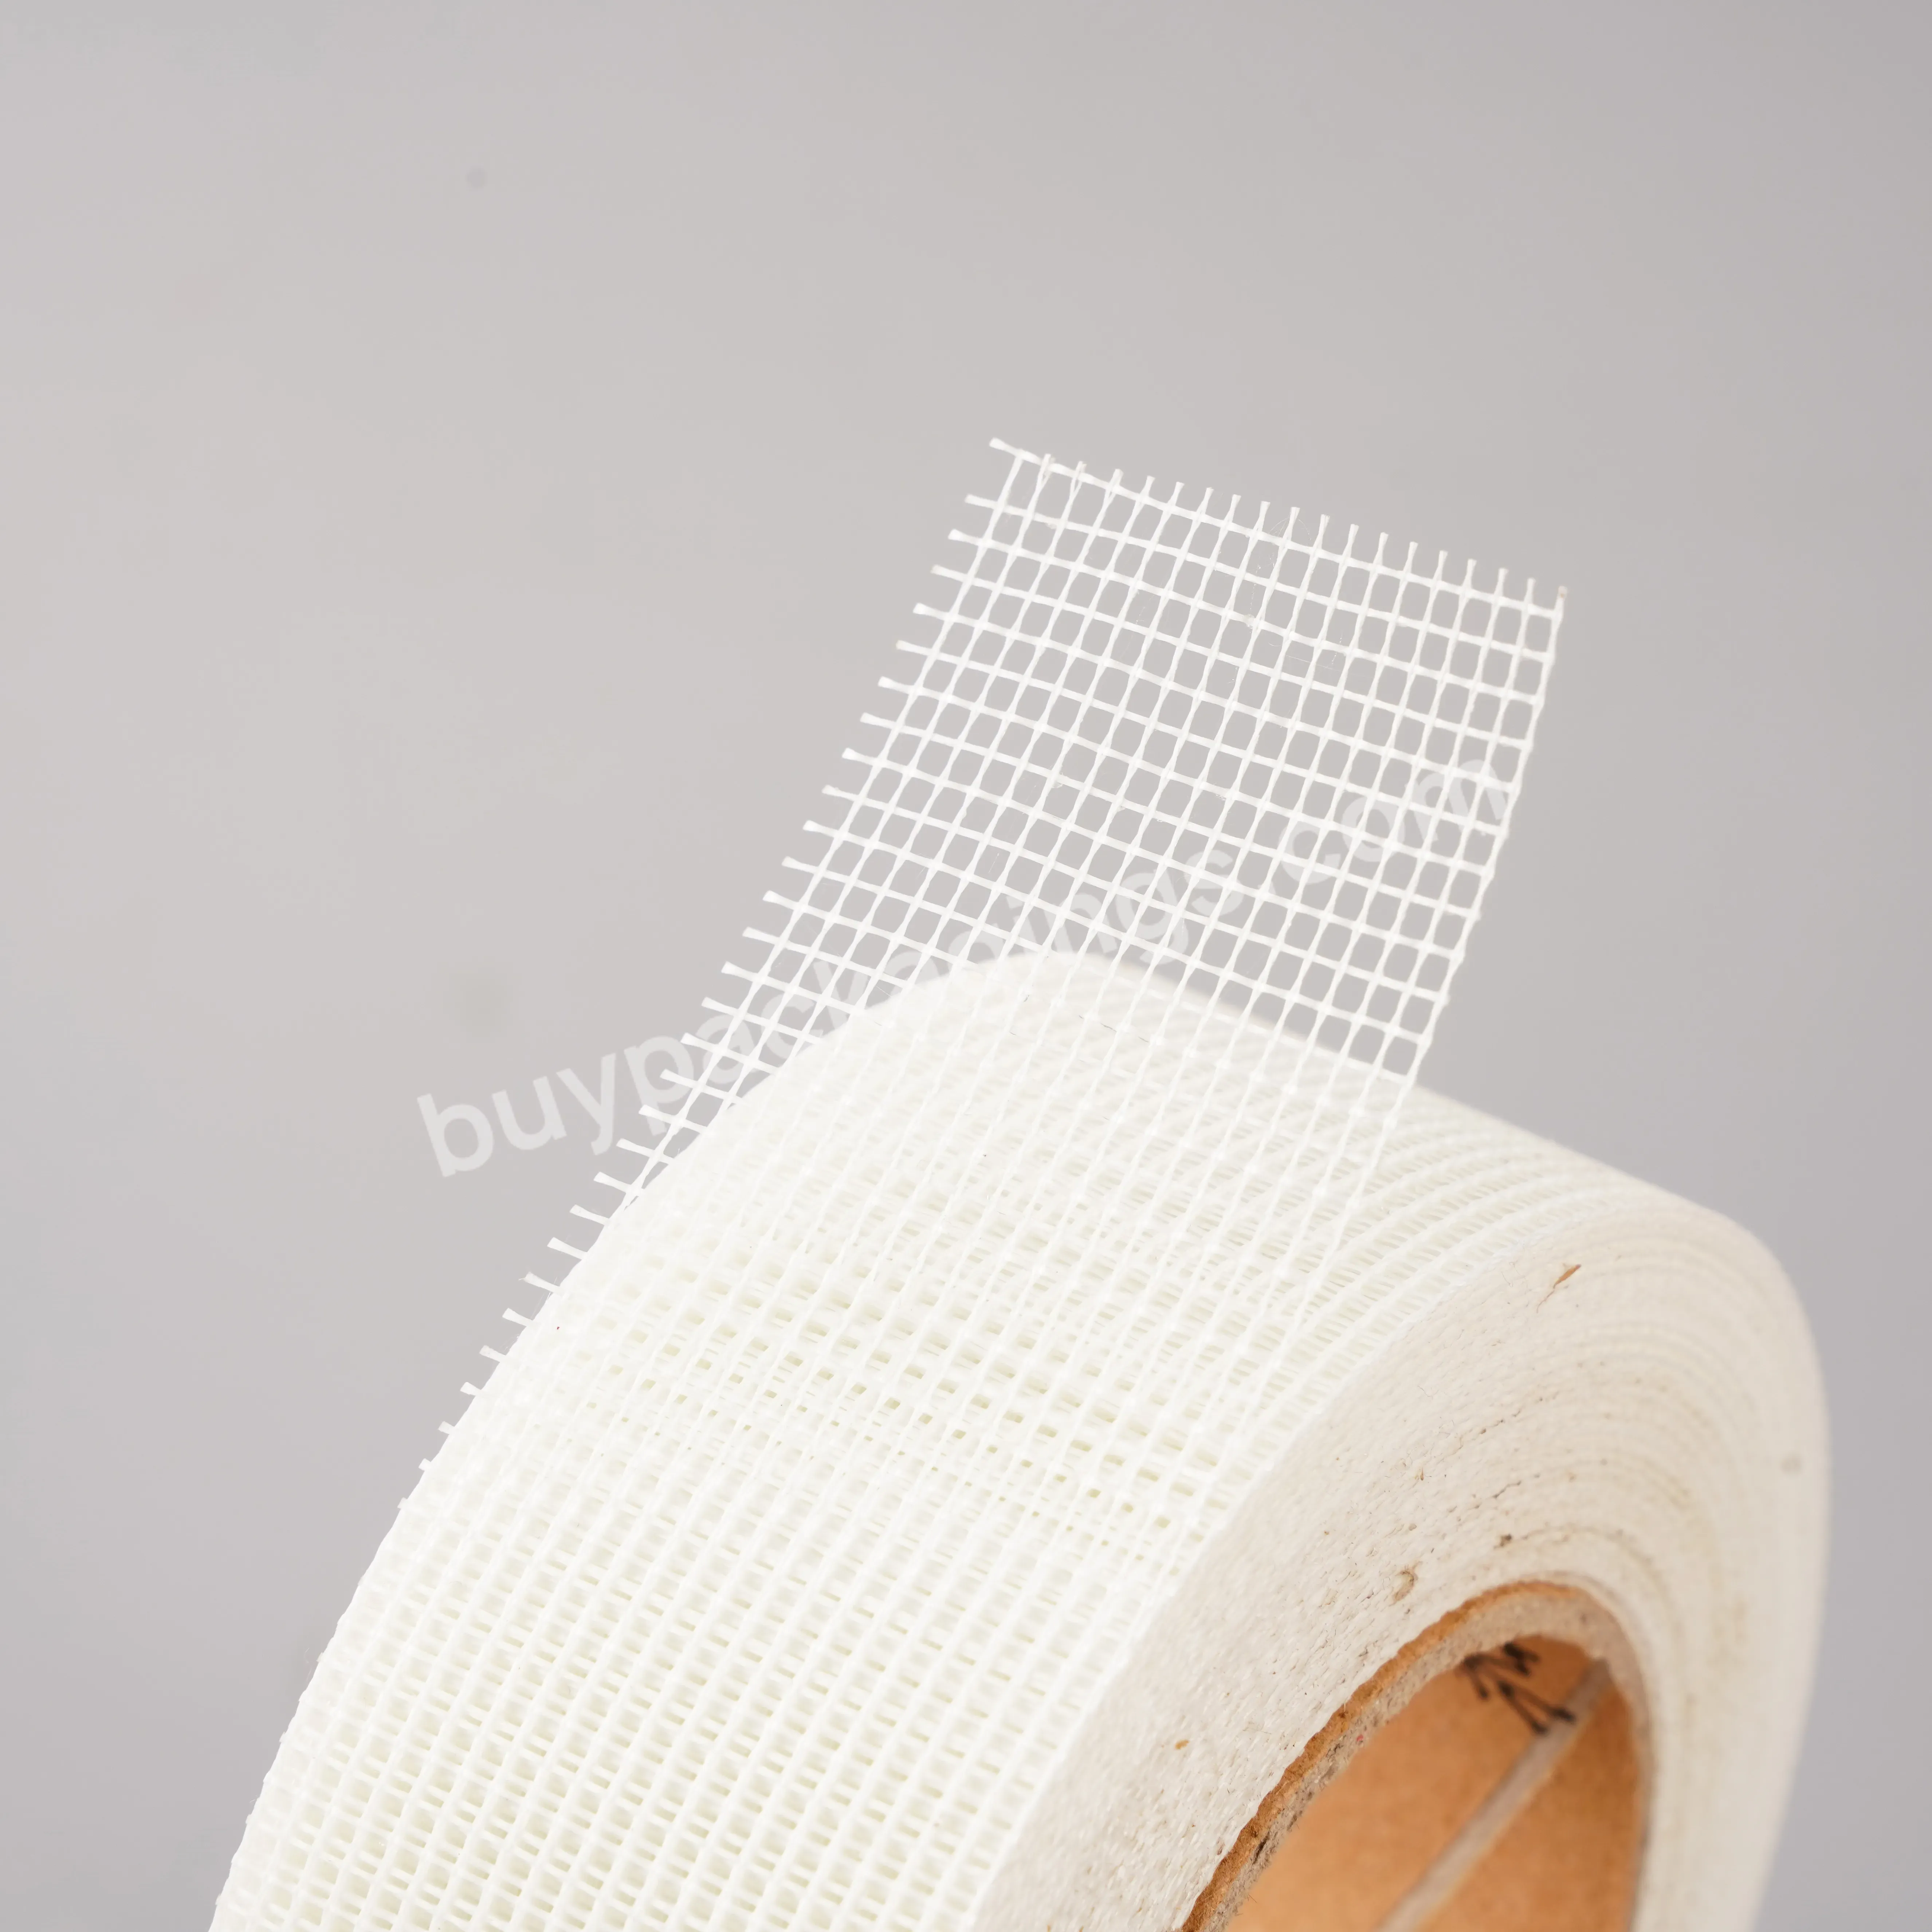 Decorate Self-adhesive Mesh With Seam Belt For Exterior Wall Body - Buy Mesh Fiber Tape Gum Backing Filament Tape Cross-weaved 50mm,Adhesive Cloth Tape,Double Sided Mesh Tape.